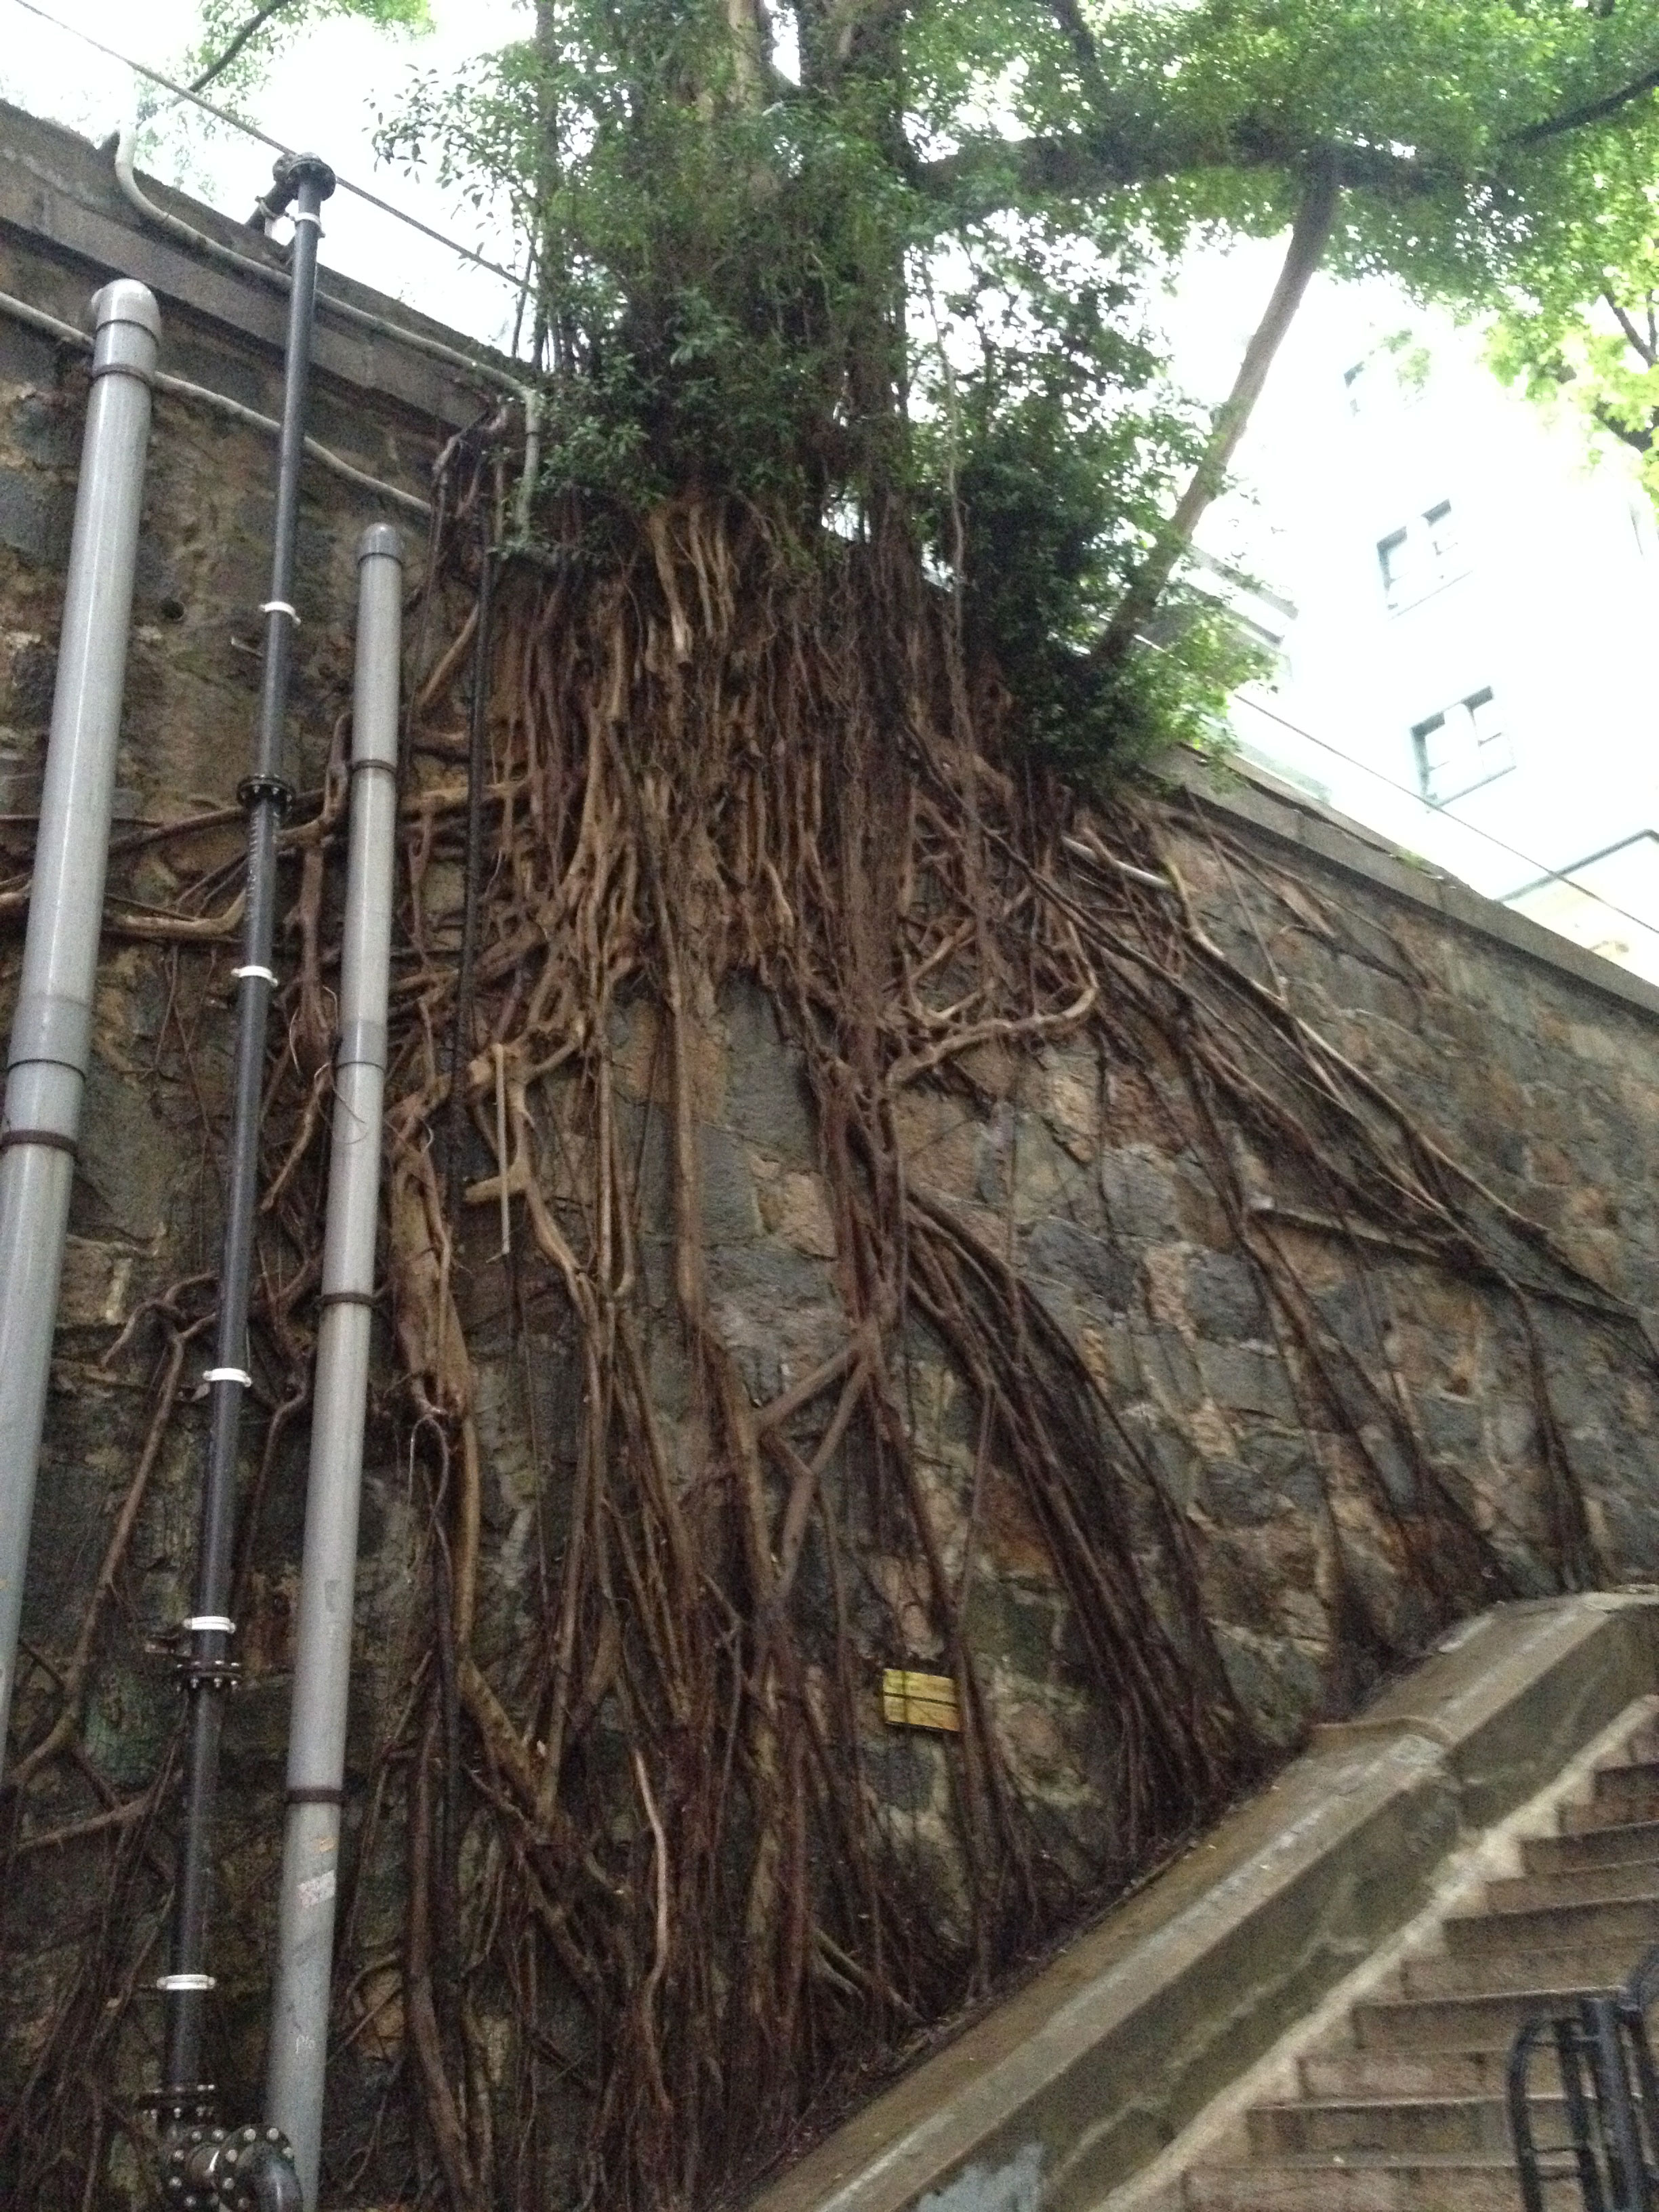 Tree root systems on old stone walls in Central display <em>aphercotropism</em>, the tendency of an organism to grow around an obstacle.